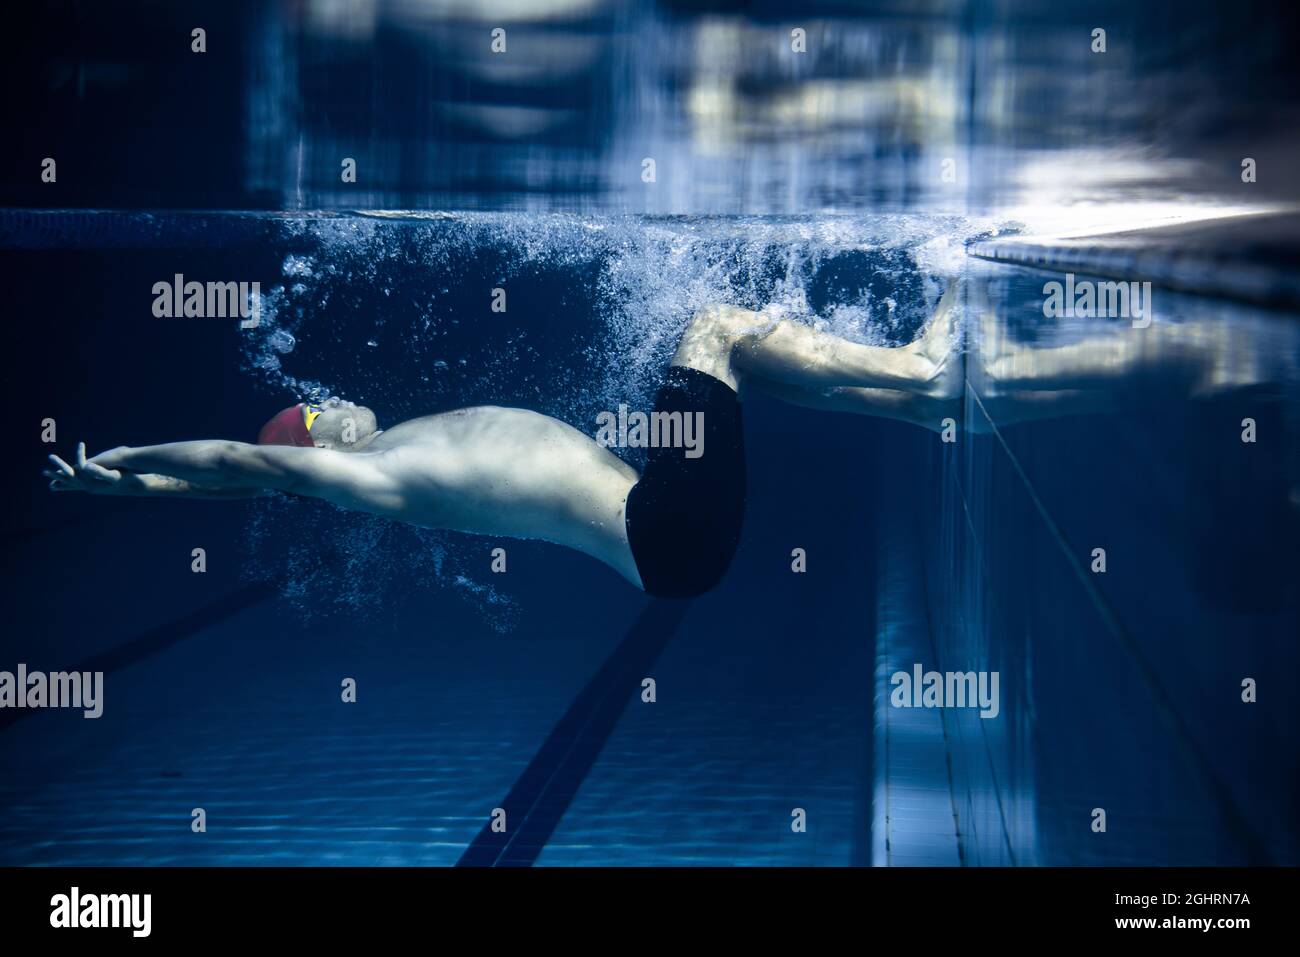 One Male Swimmer Practicing And Training At Pool Indoors Underwater